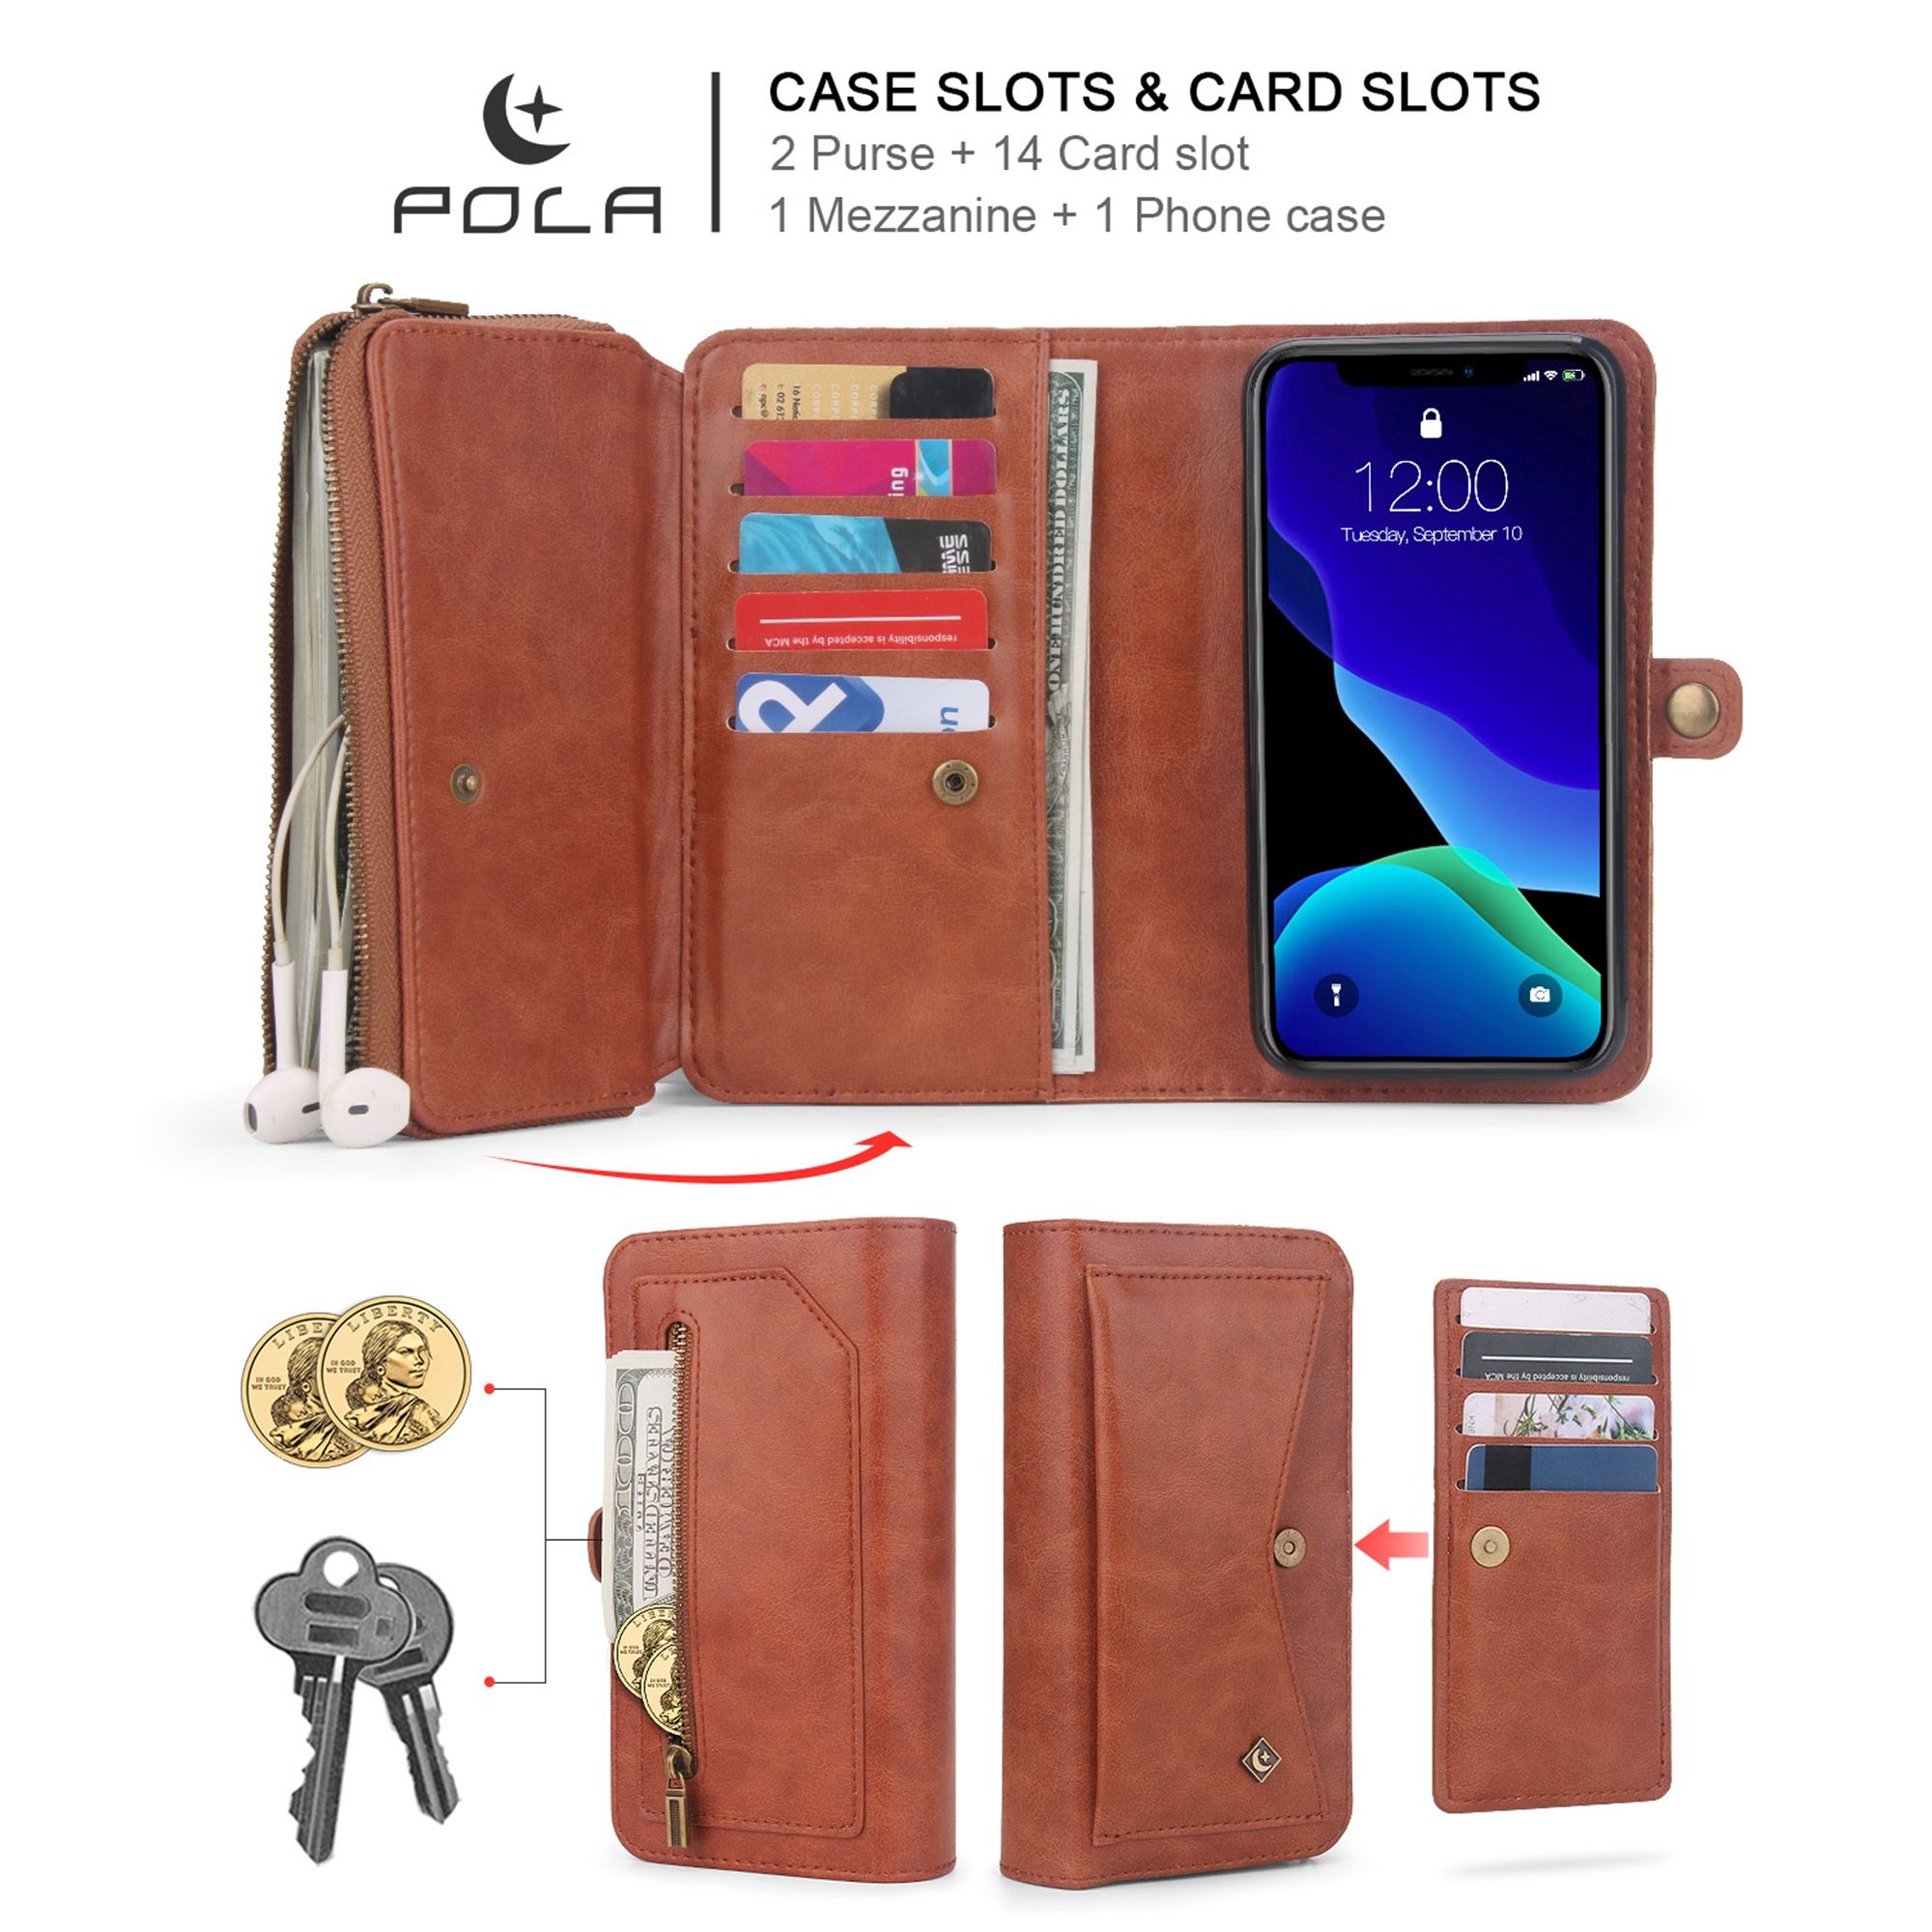 iPhone 11Pro 5.8 inch Wallet Case, Dteck 2 in 1 Leather Zipper Purse Multi-Function Tri-fold Wallet Case Detachable Magnetic Phone Cover with 14 Card Slots Money Pocket For iPhone 11 Pro,Brown - image 5 of 11